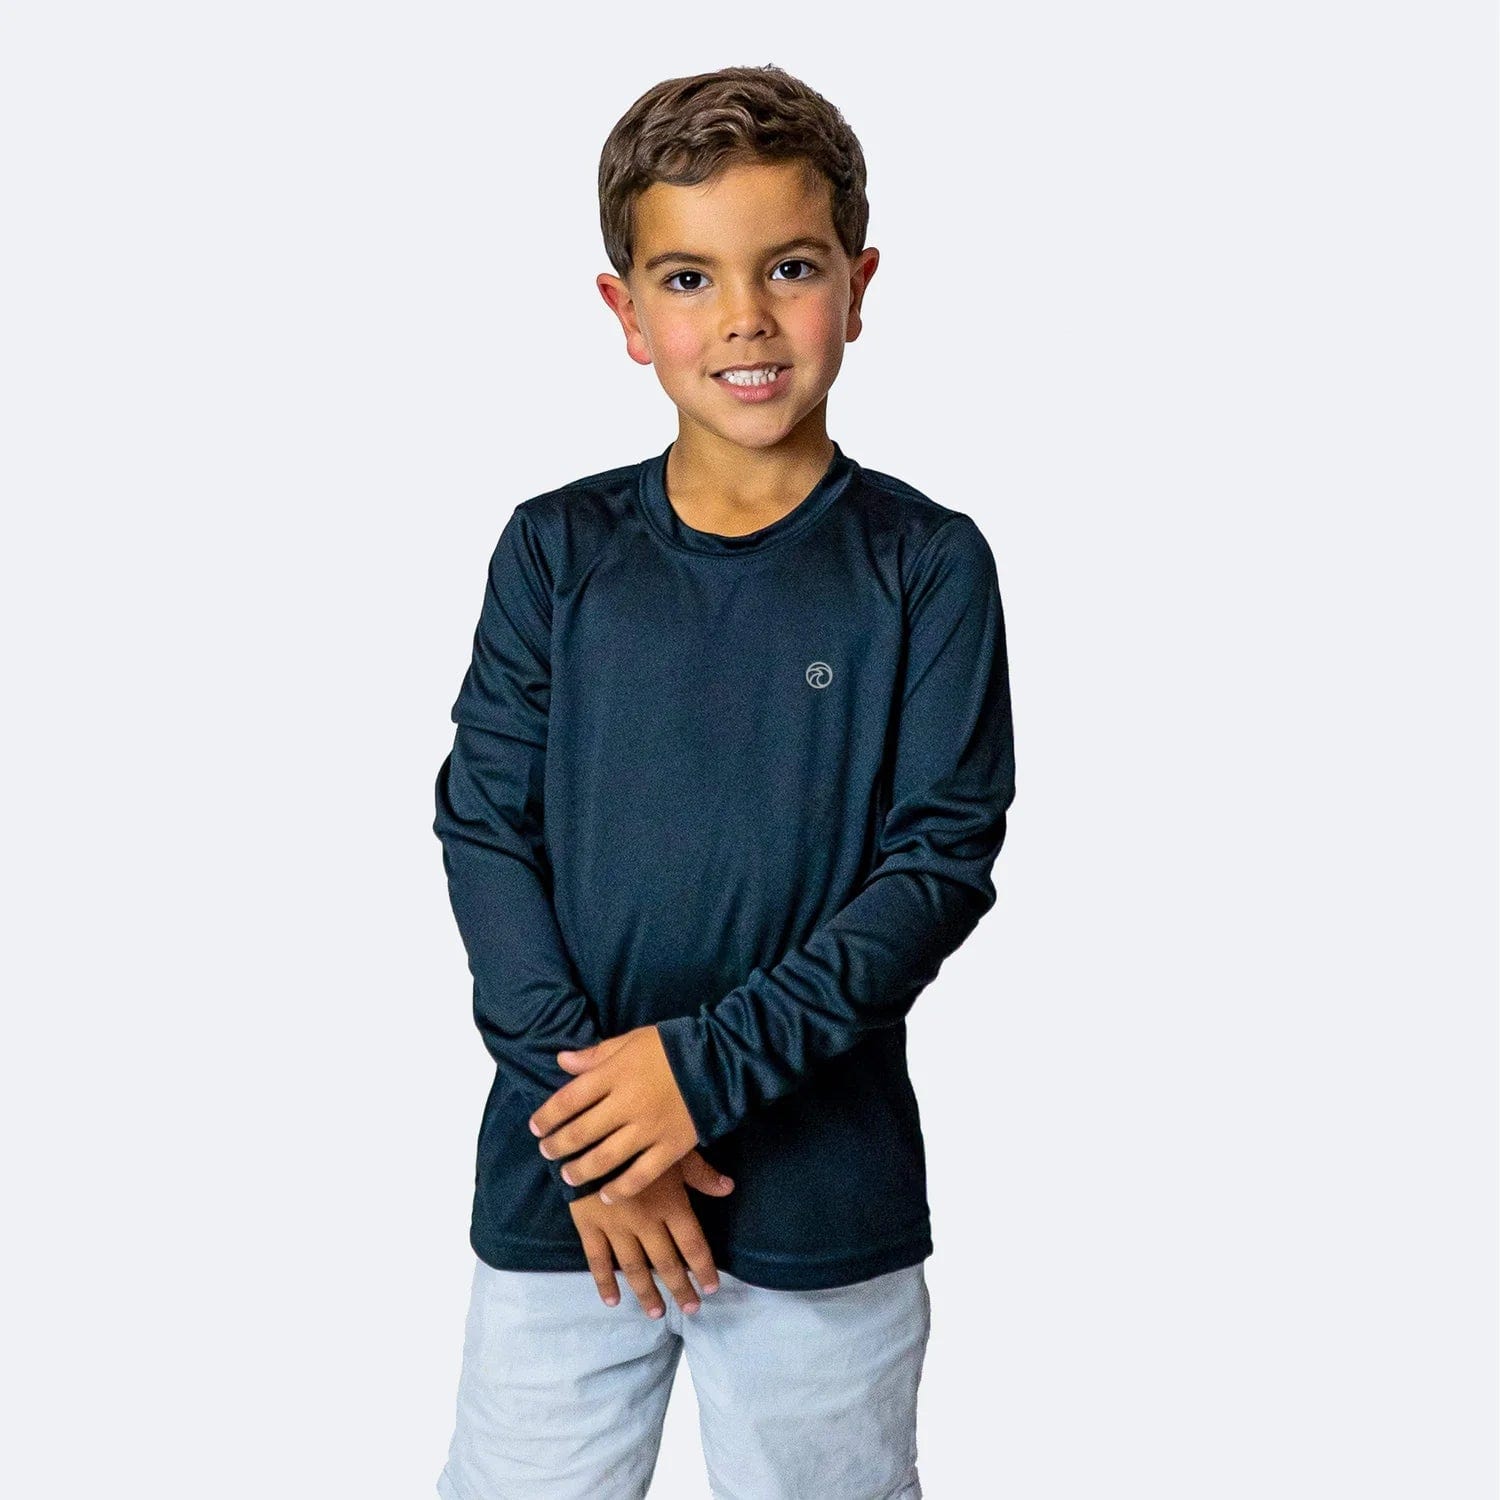 Sublimation Ready Vapor Toddler Long Sleeve Solar T-Shirt - Pale Yellow - 8407-5TPY